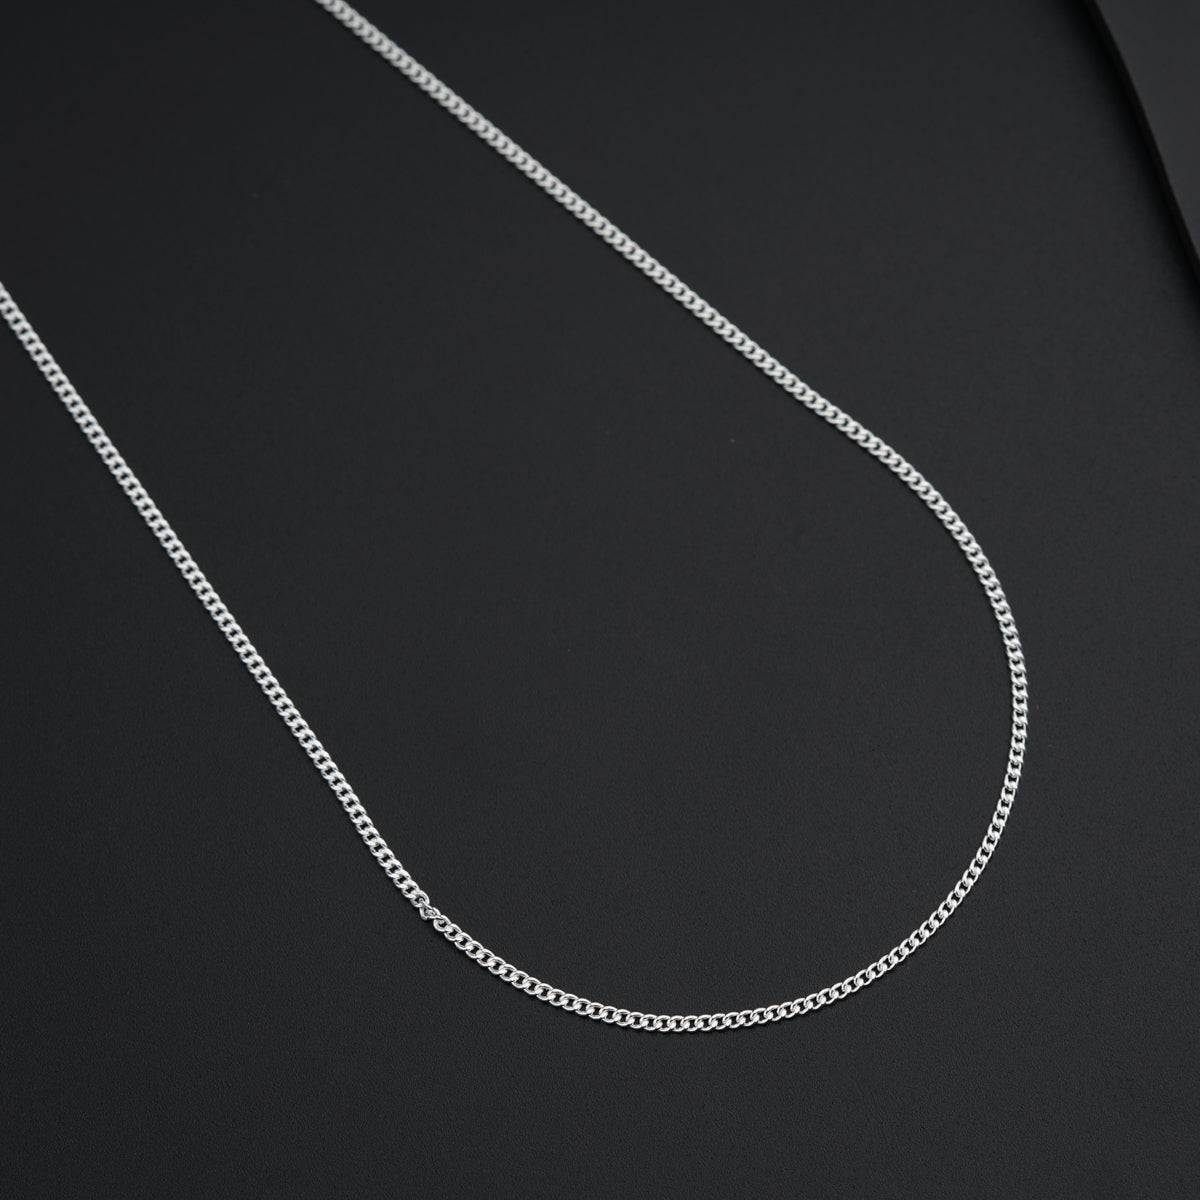 a silver chain on a black surface